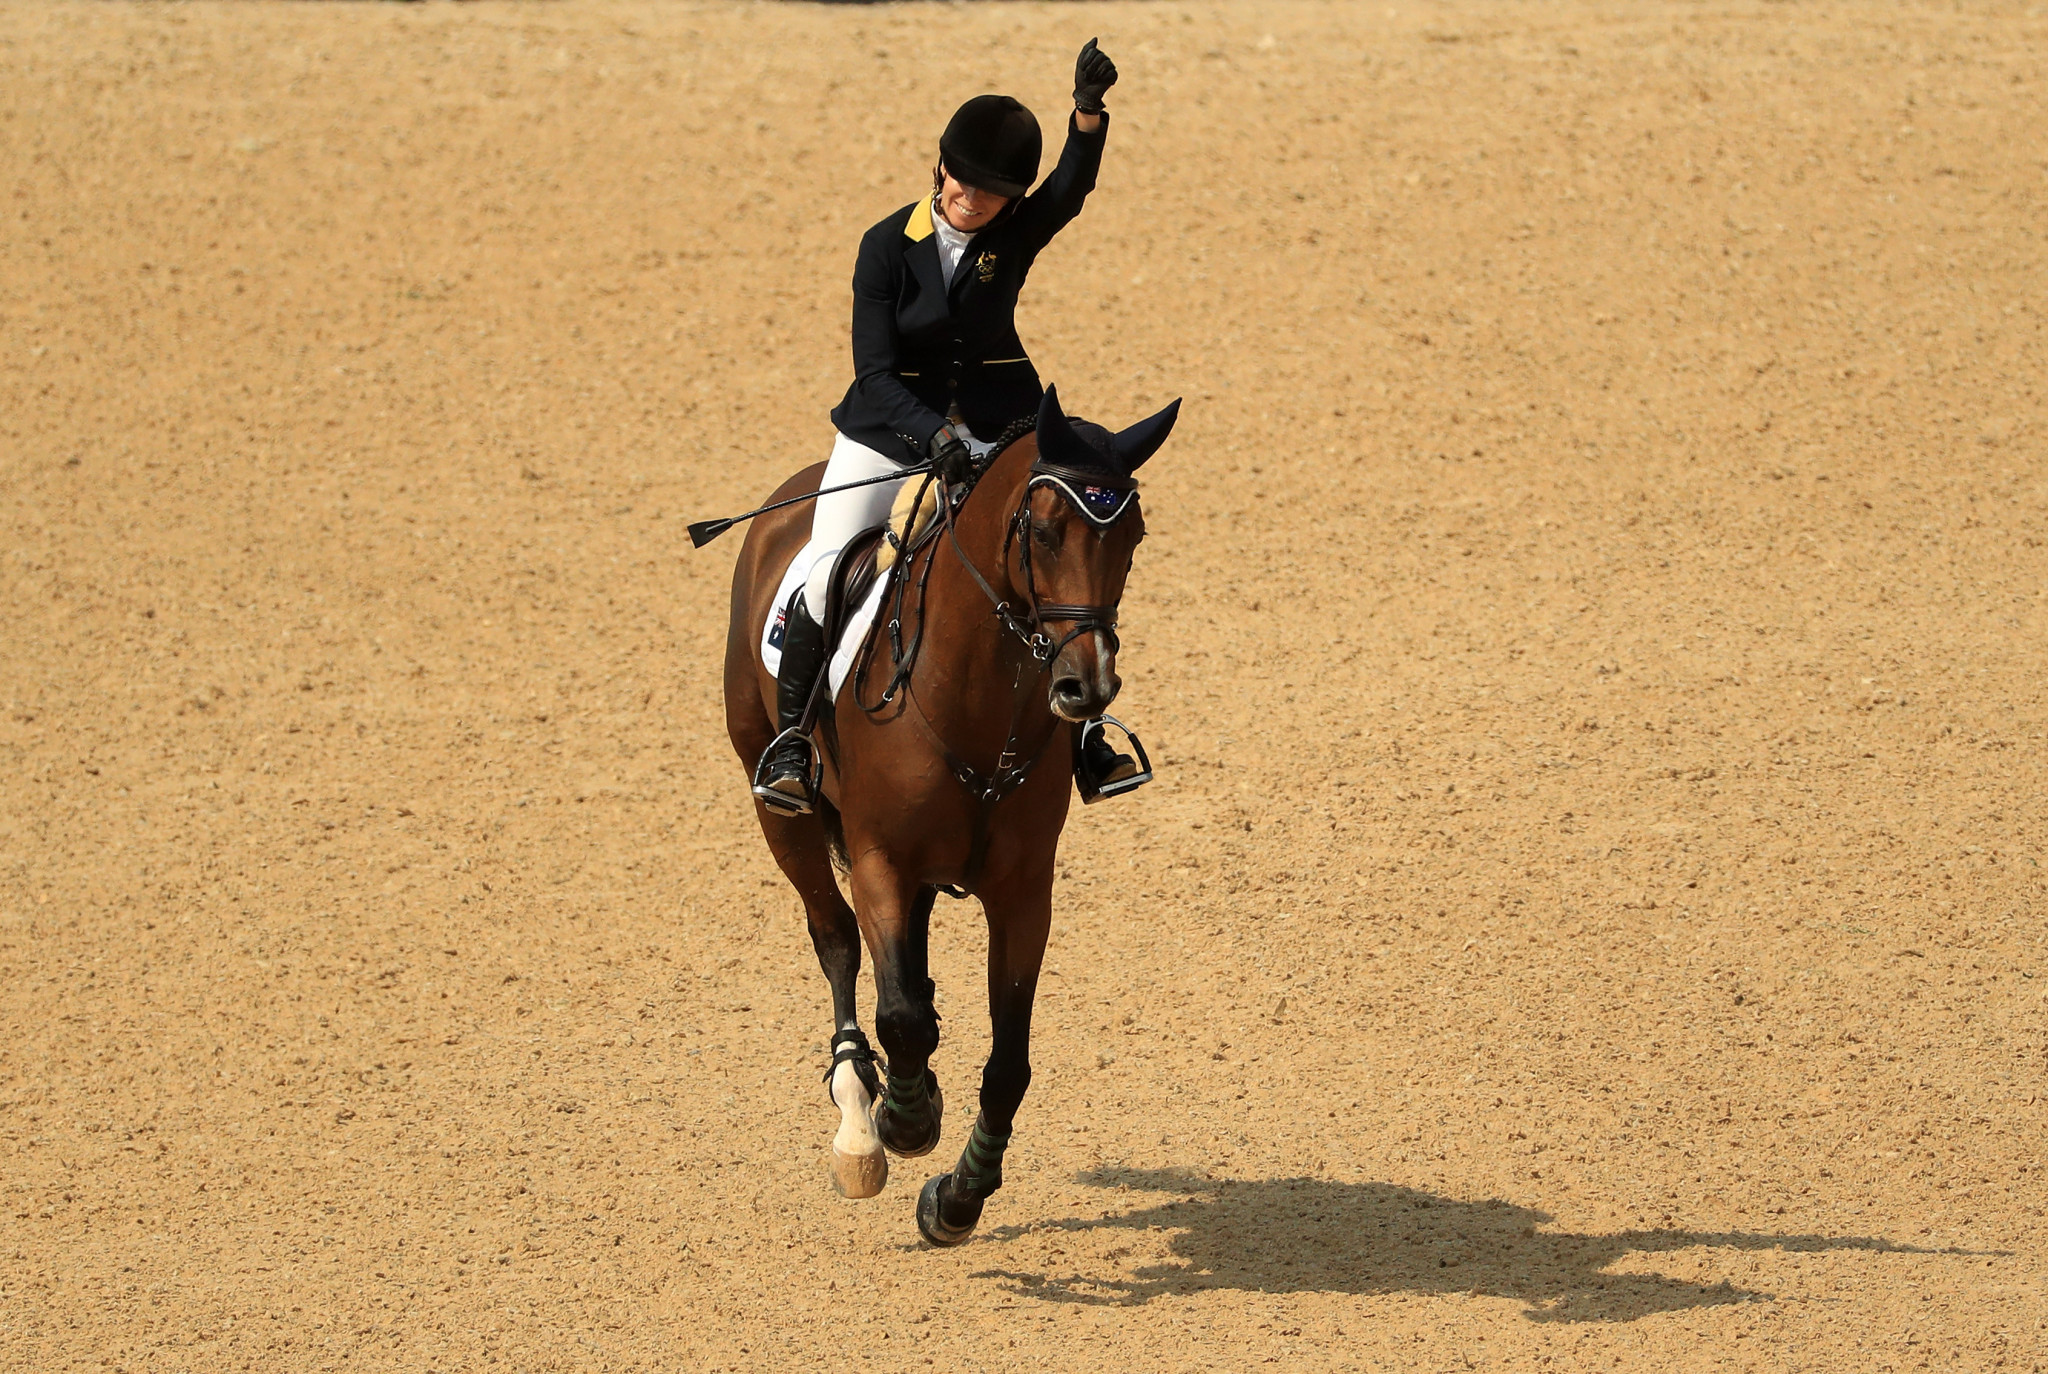 Edwina Tops-Alexander won the competition ©Getty Images